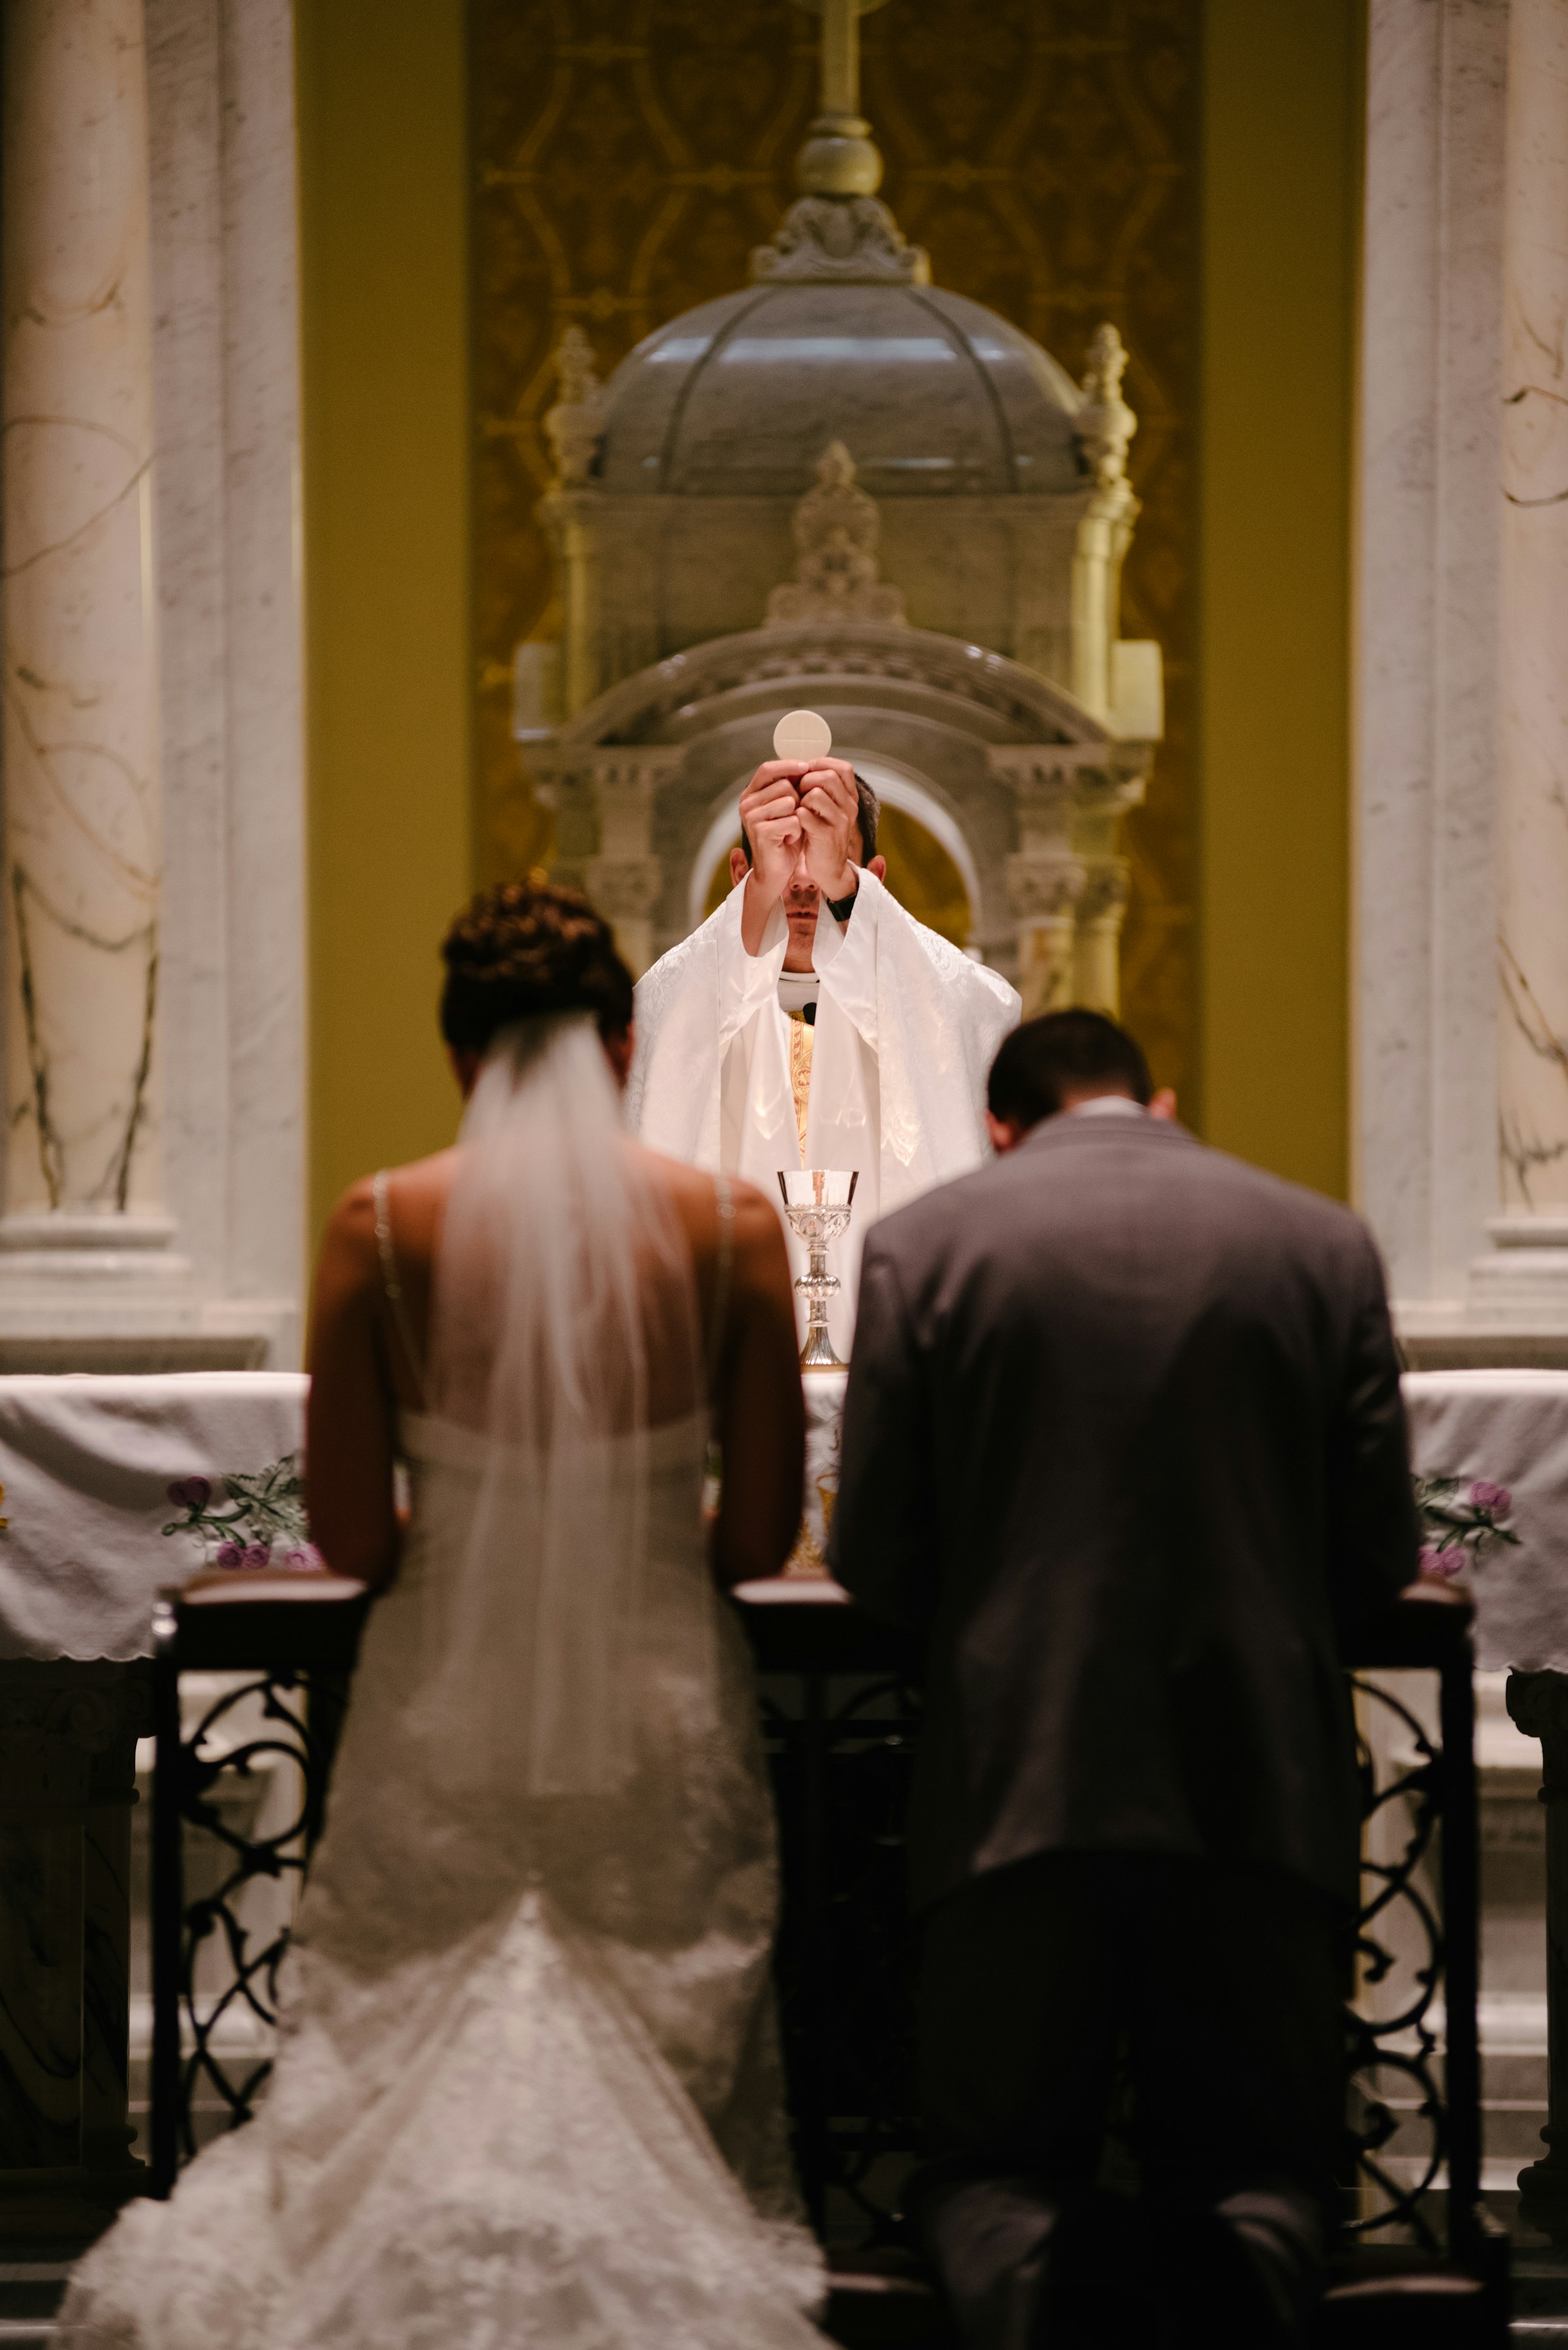 A couple at the altar | Source: Unsplash